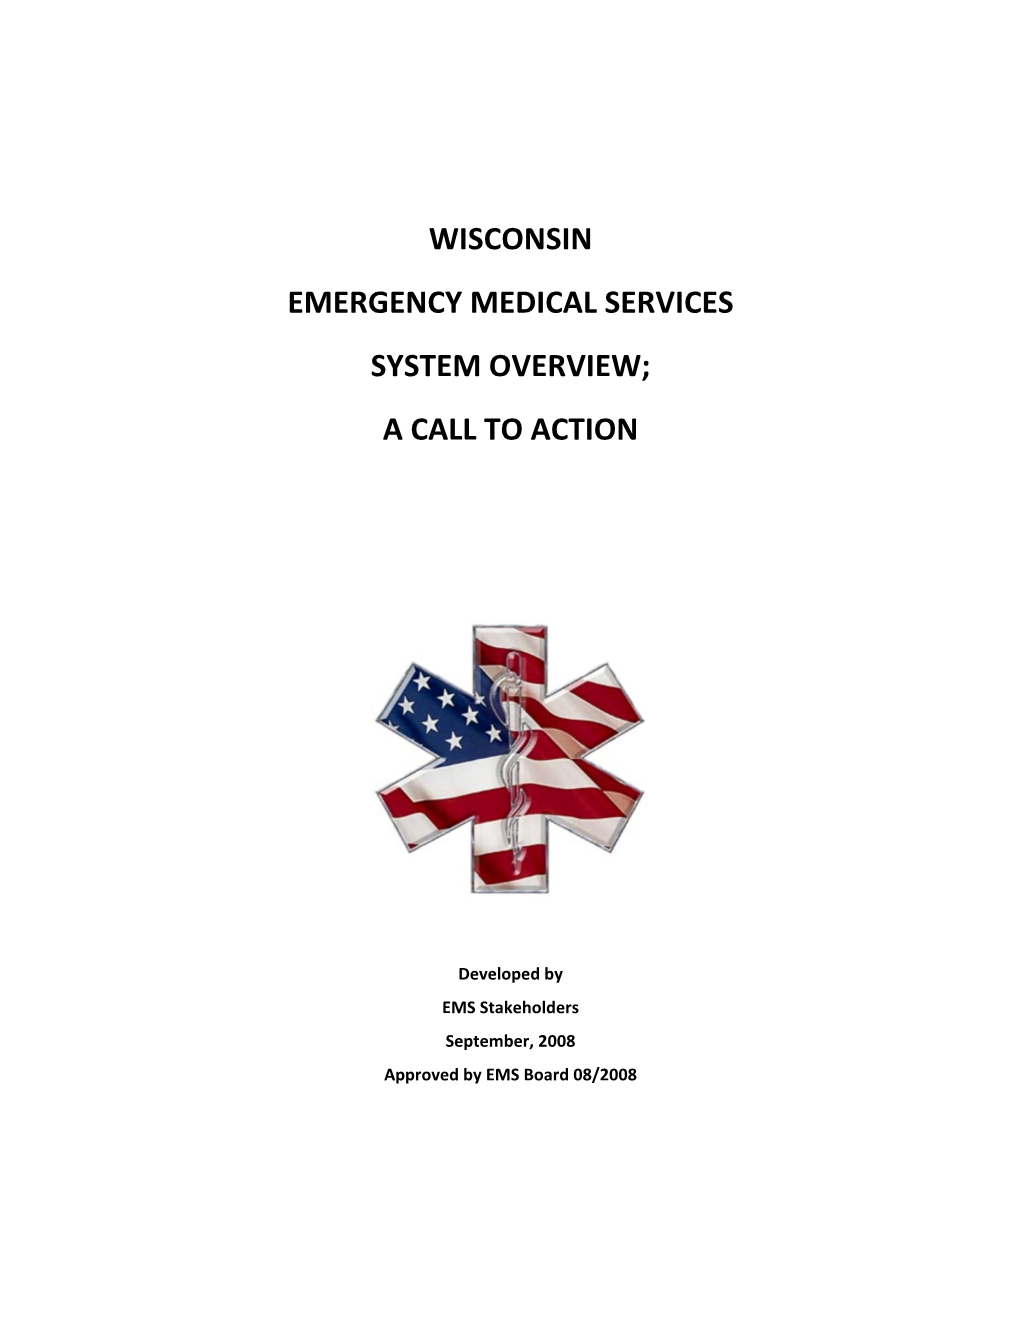 Wisconsin Emergency Medical Services System Overview; a Call to Action